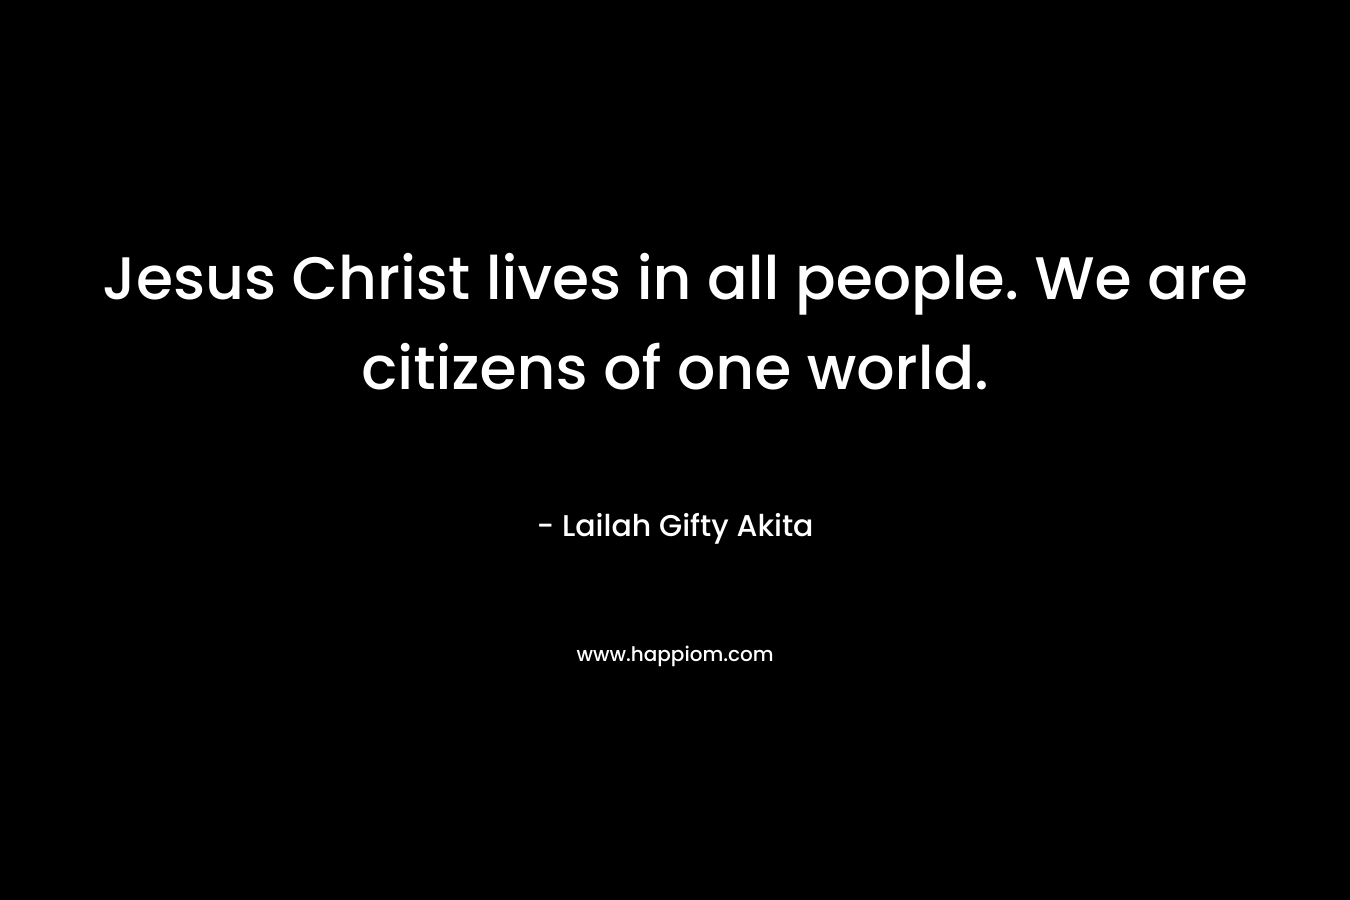 Jesus Christ lives in all people. We are citizens of one world.